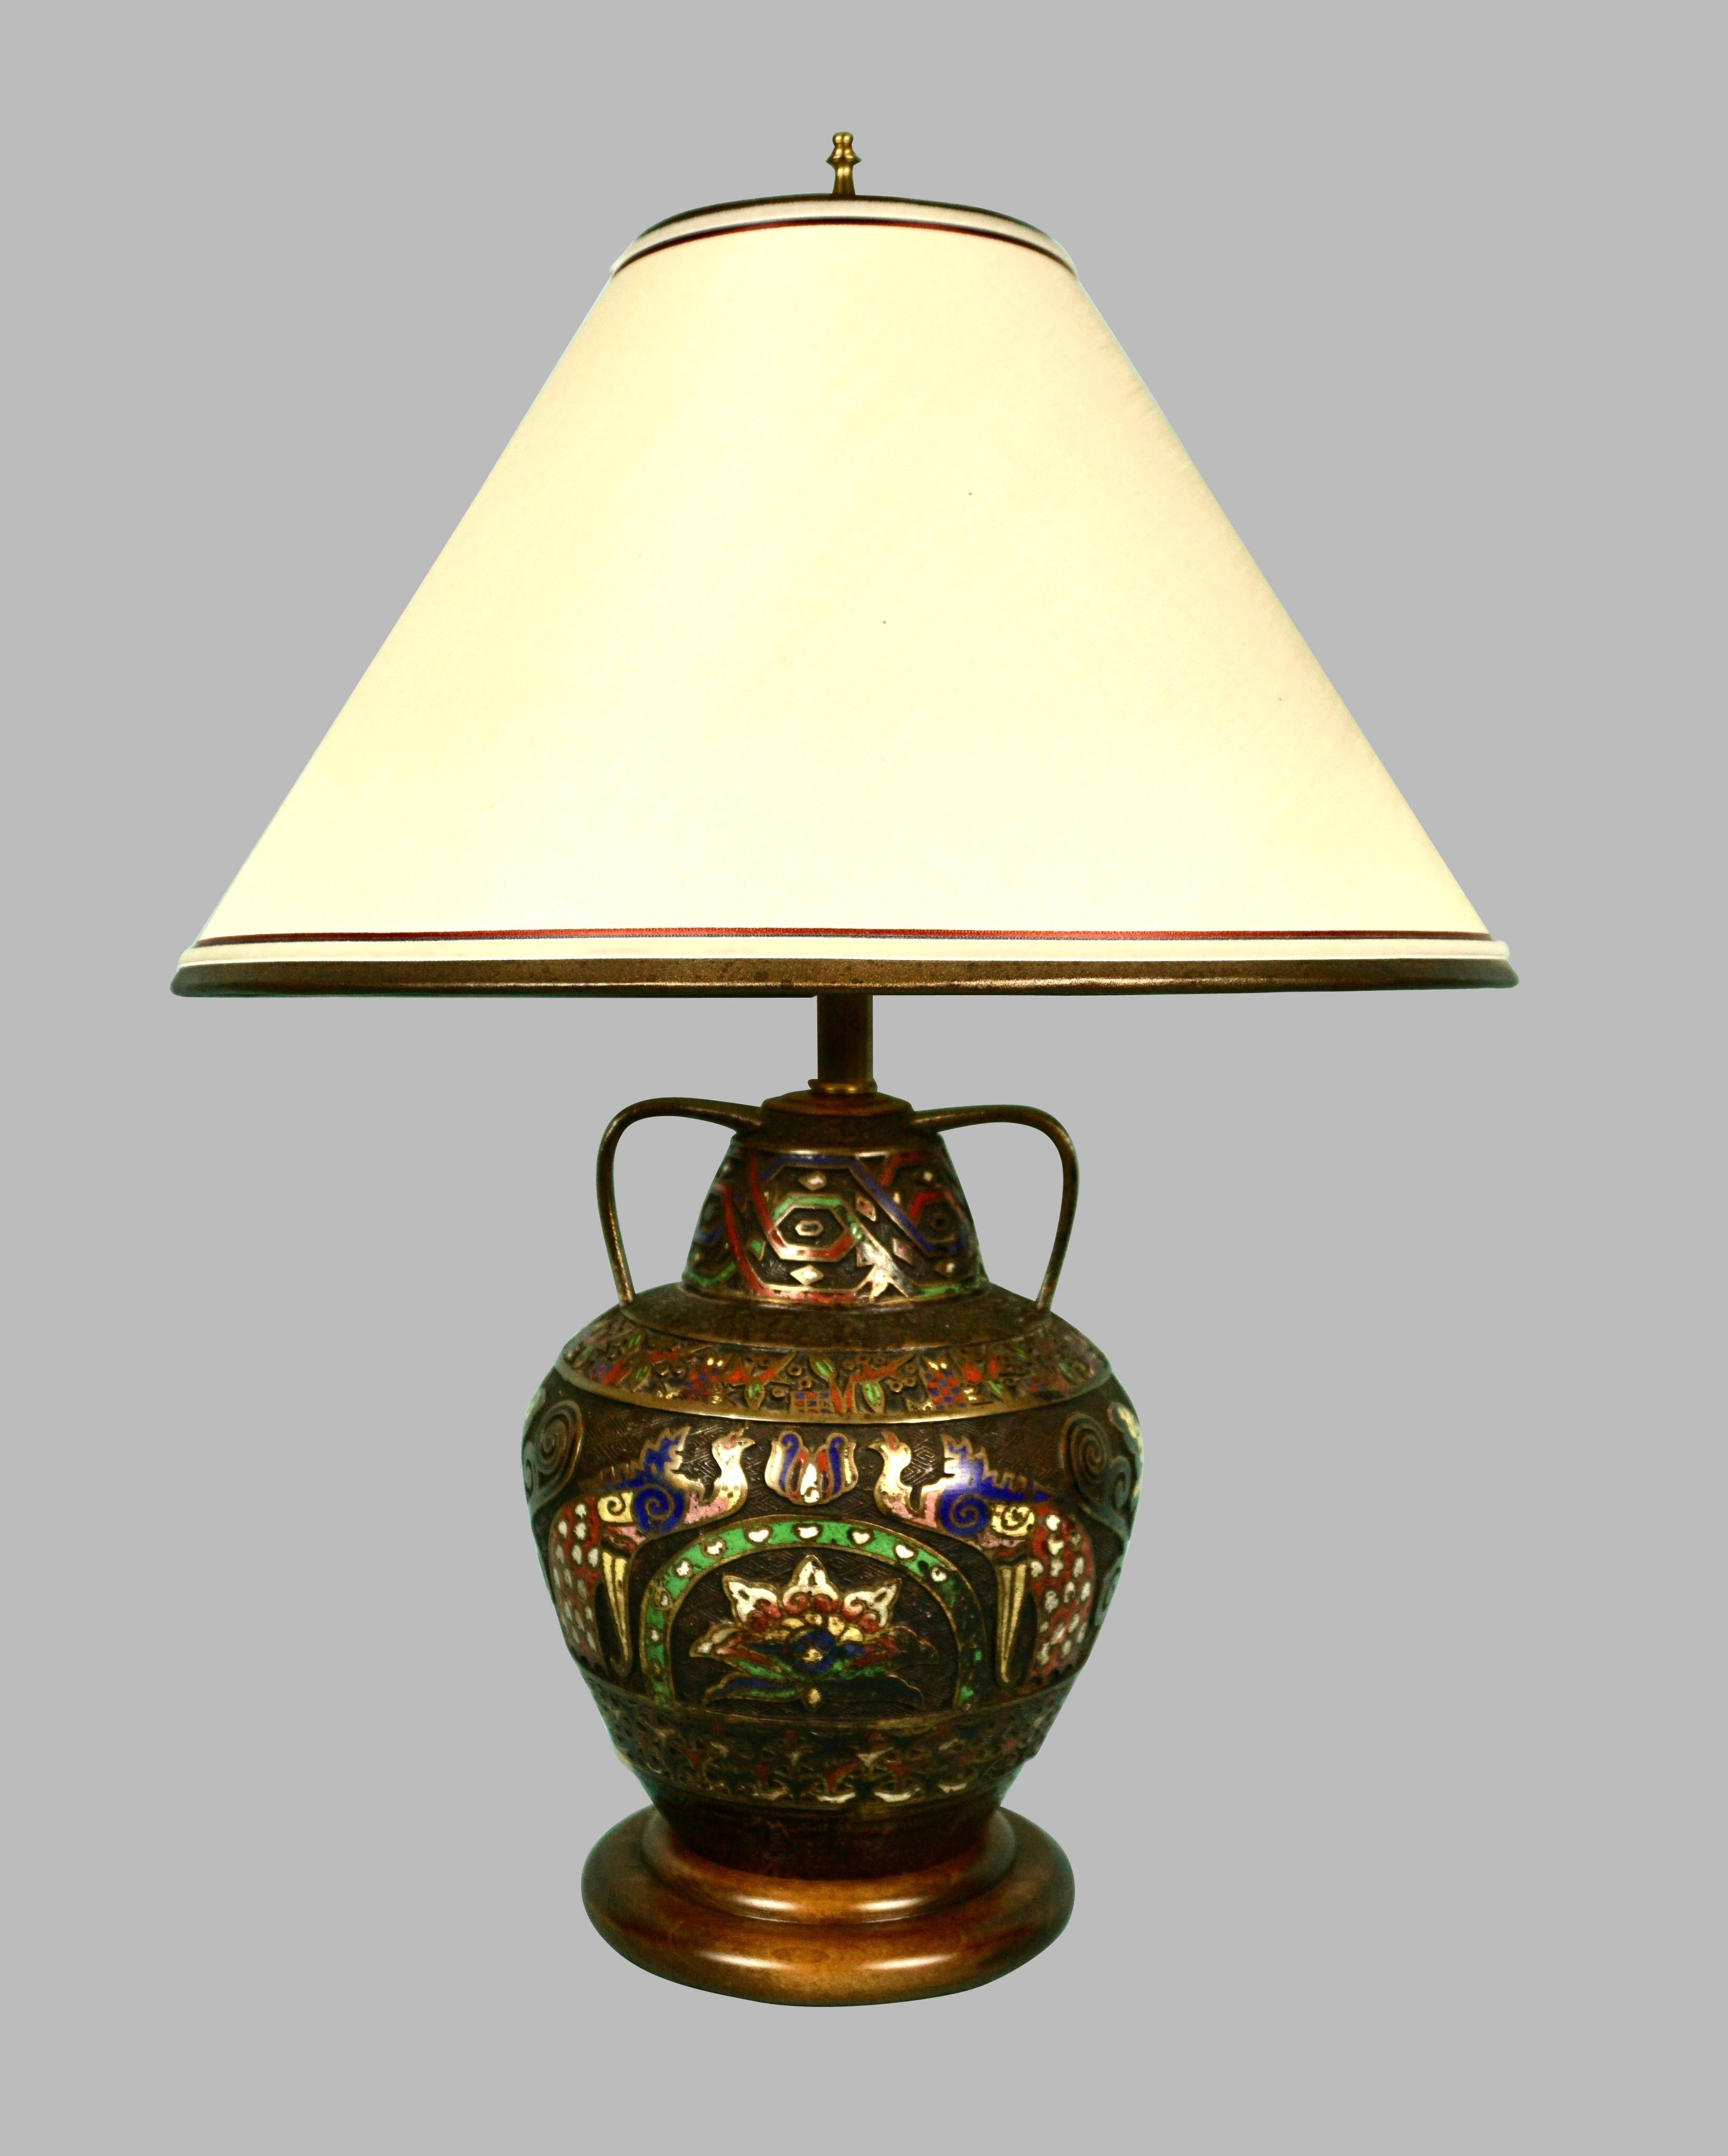 A Japanese brass champleve vase of baluster form with 2 handles decorated overall with stylized peacocks and butterflies in tones of blue and red now electrified and fitted as a lamp resting on a wooden base. Champleve is a process of filling